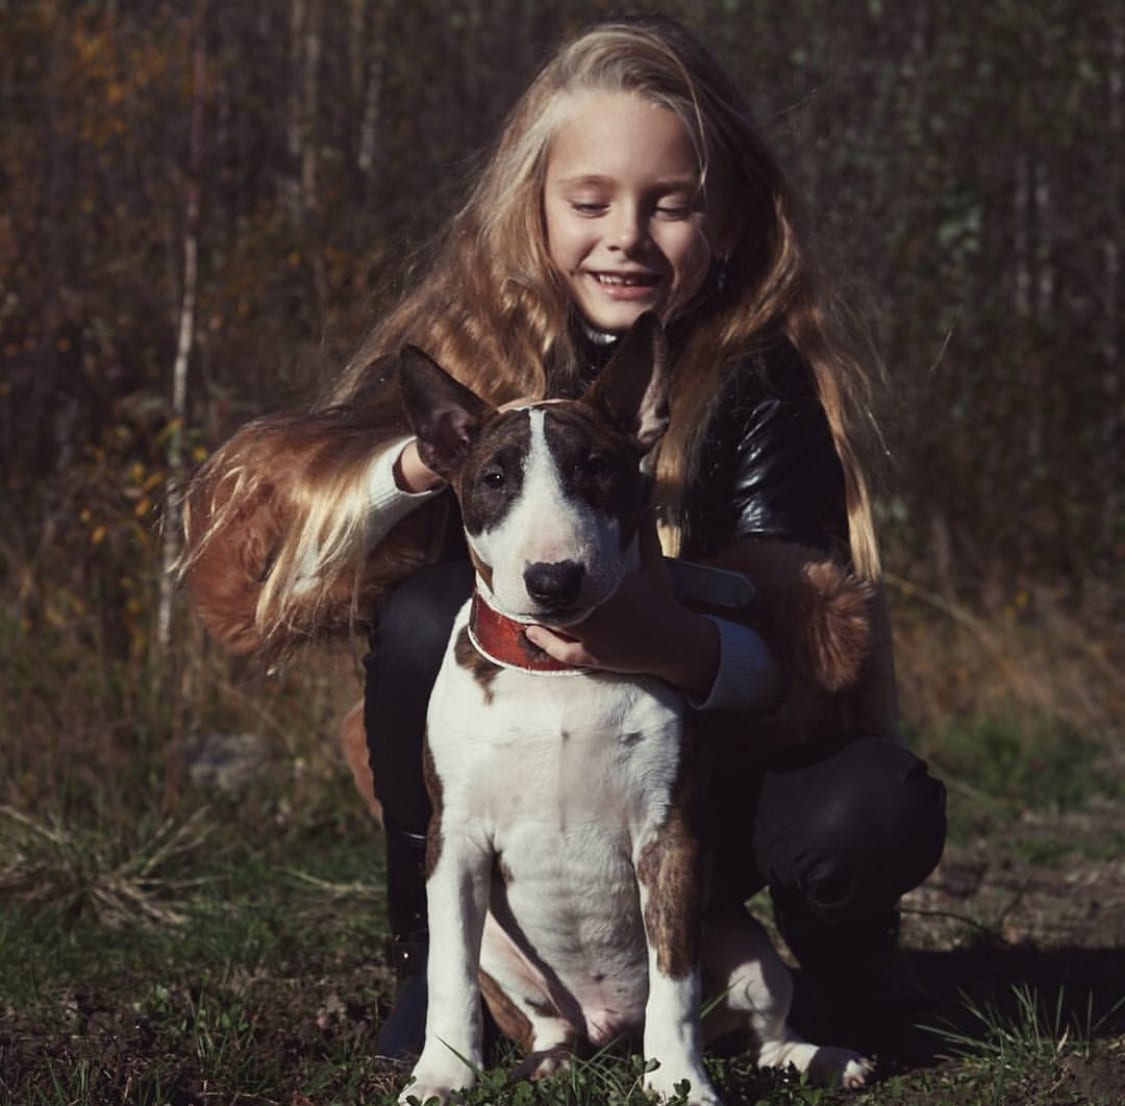 A Bull Terrier puppy sitting on the grass with a girl behind him